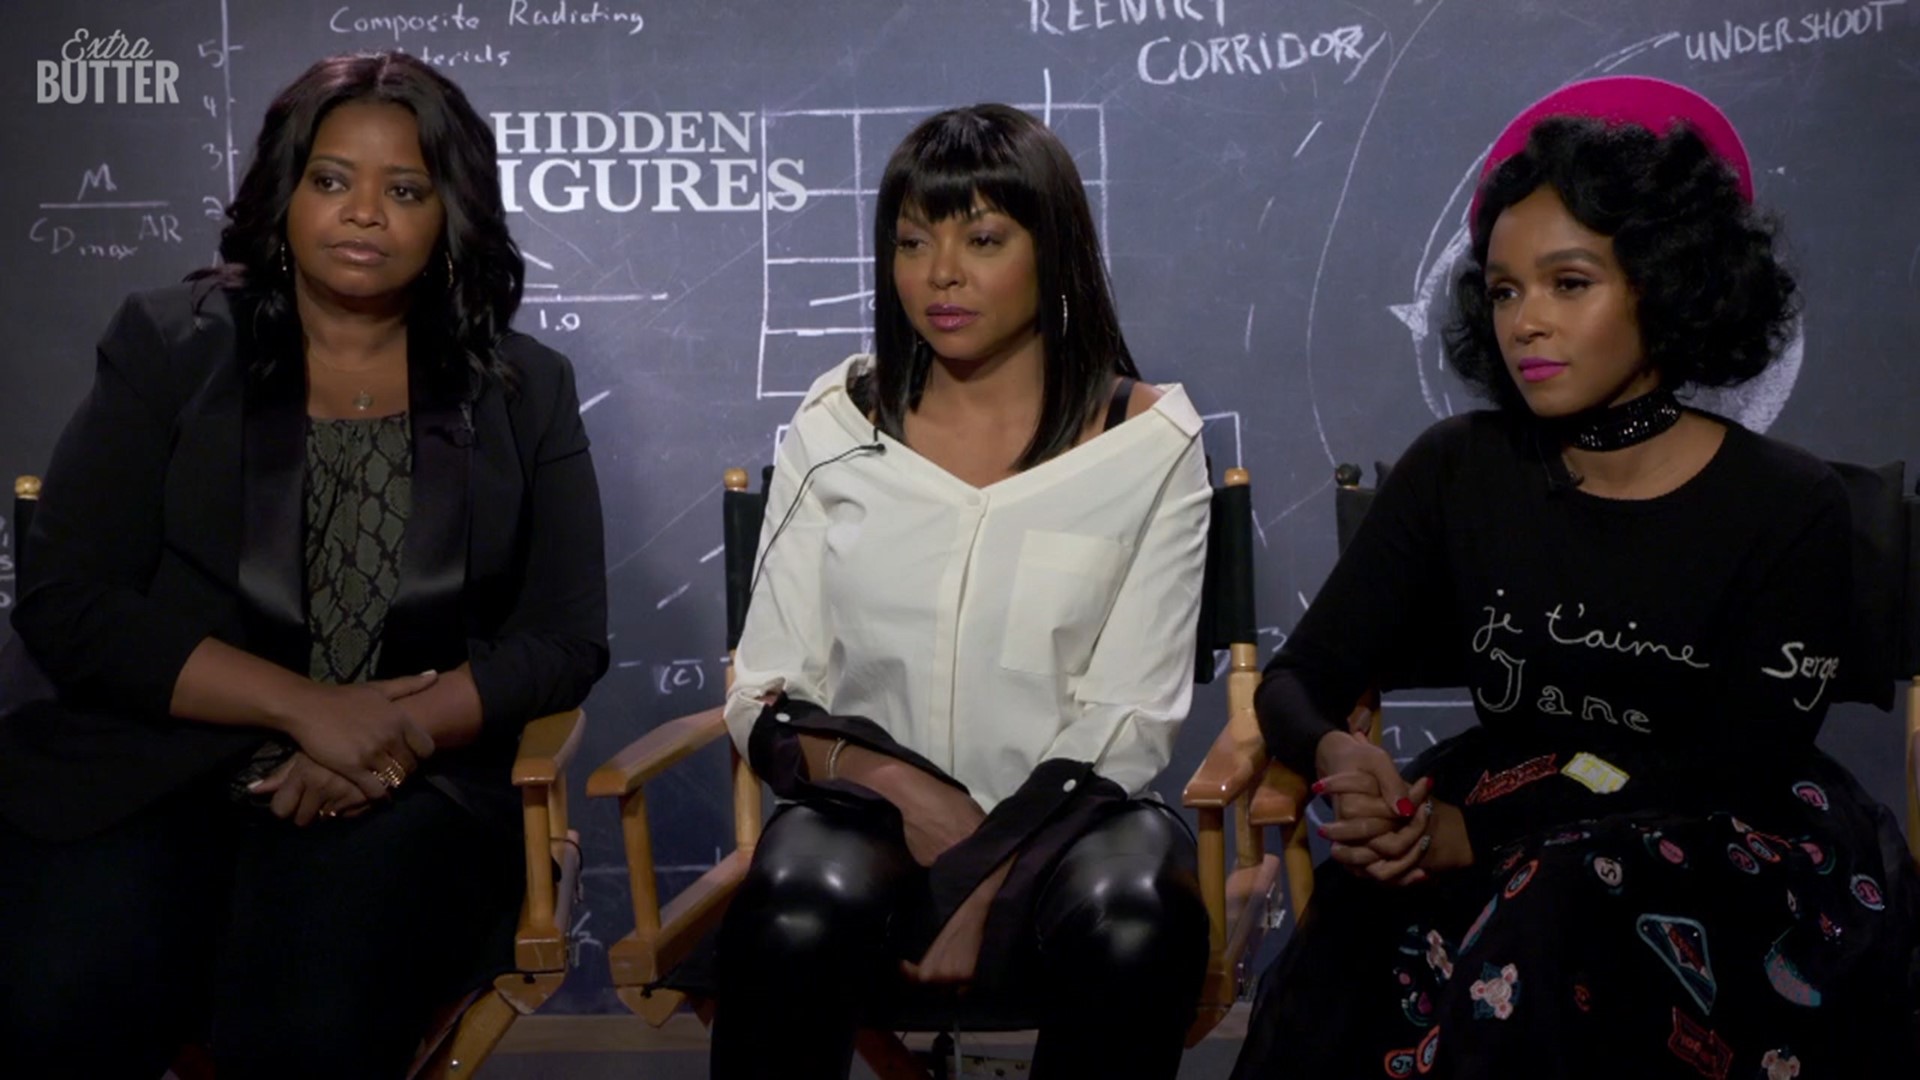 Octavia Spencer, Taraji P Henson, and Janelle Monae talk about the real-life women they portray in the movie 'Hidden Figures.'